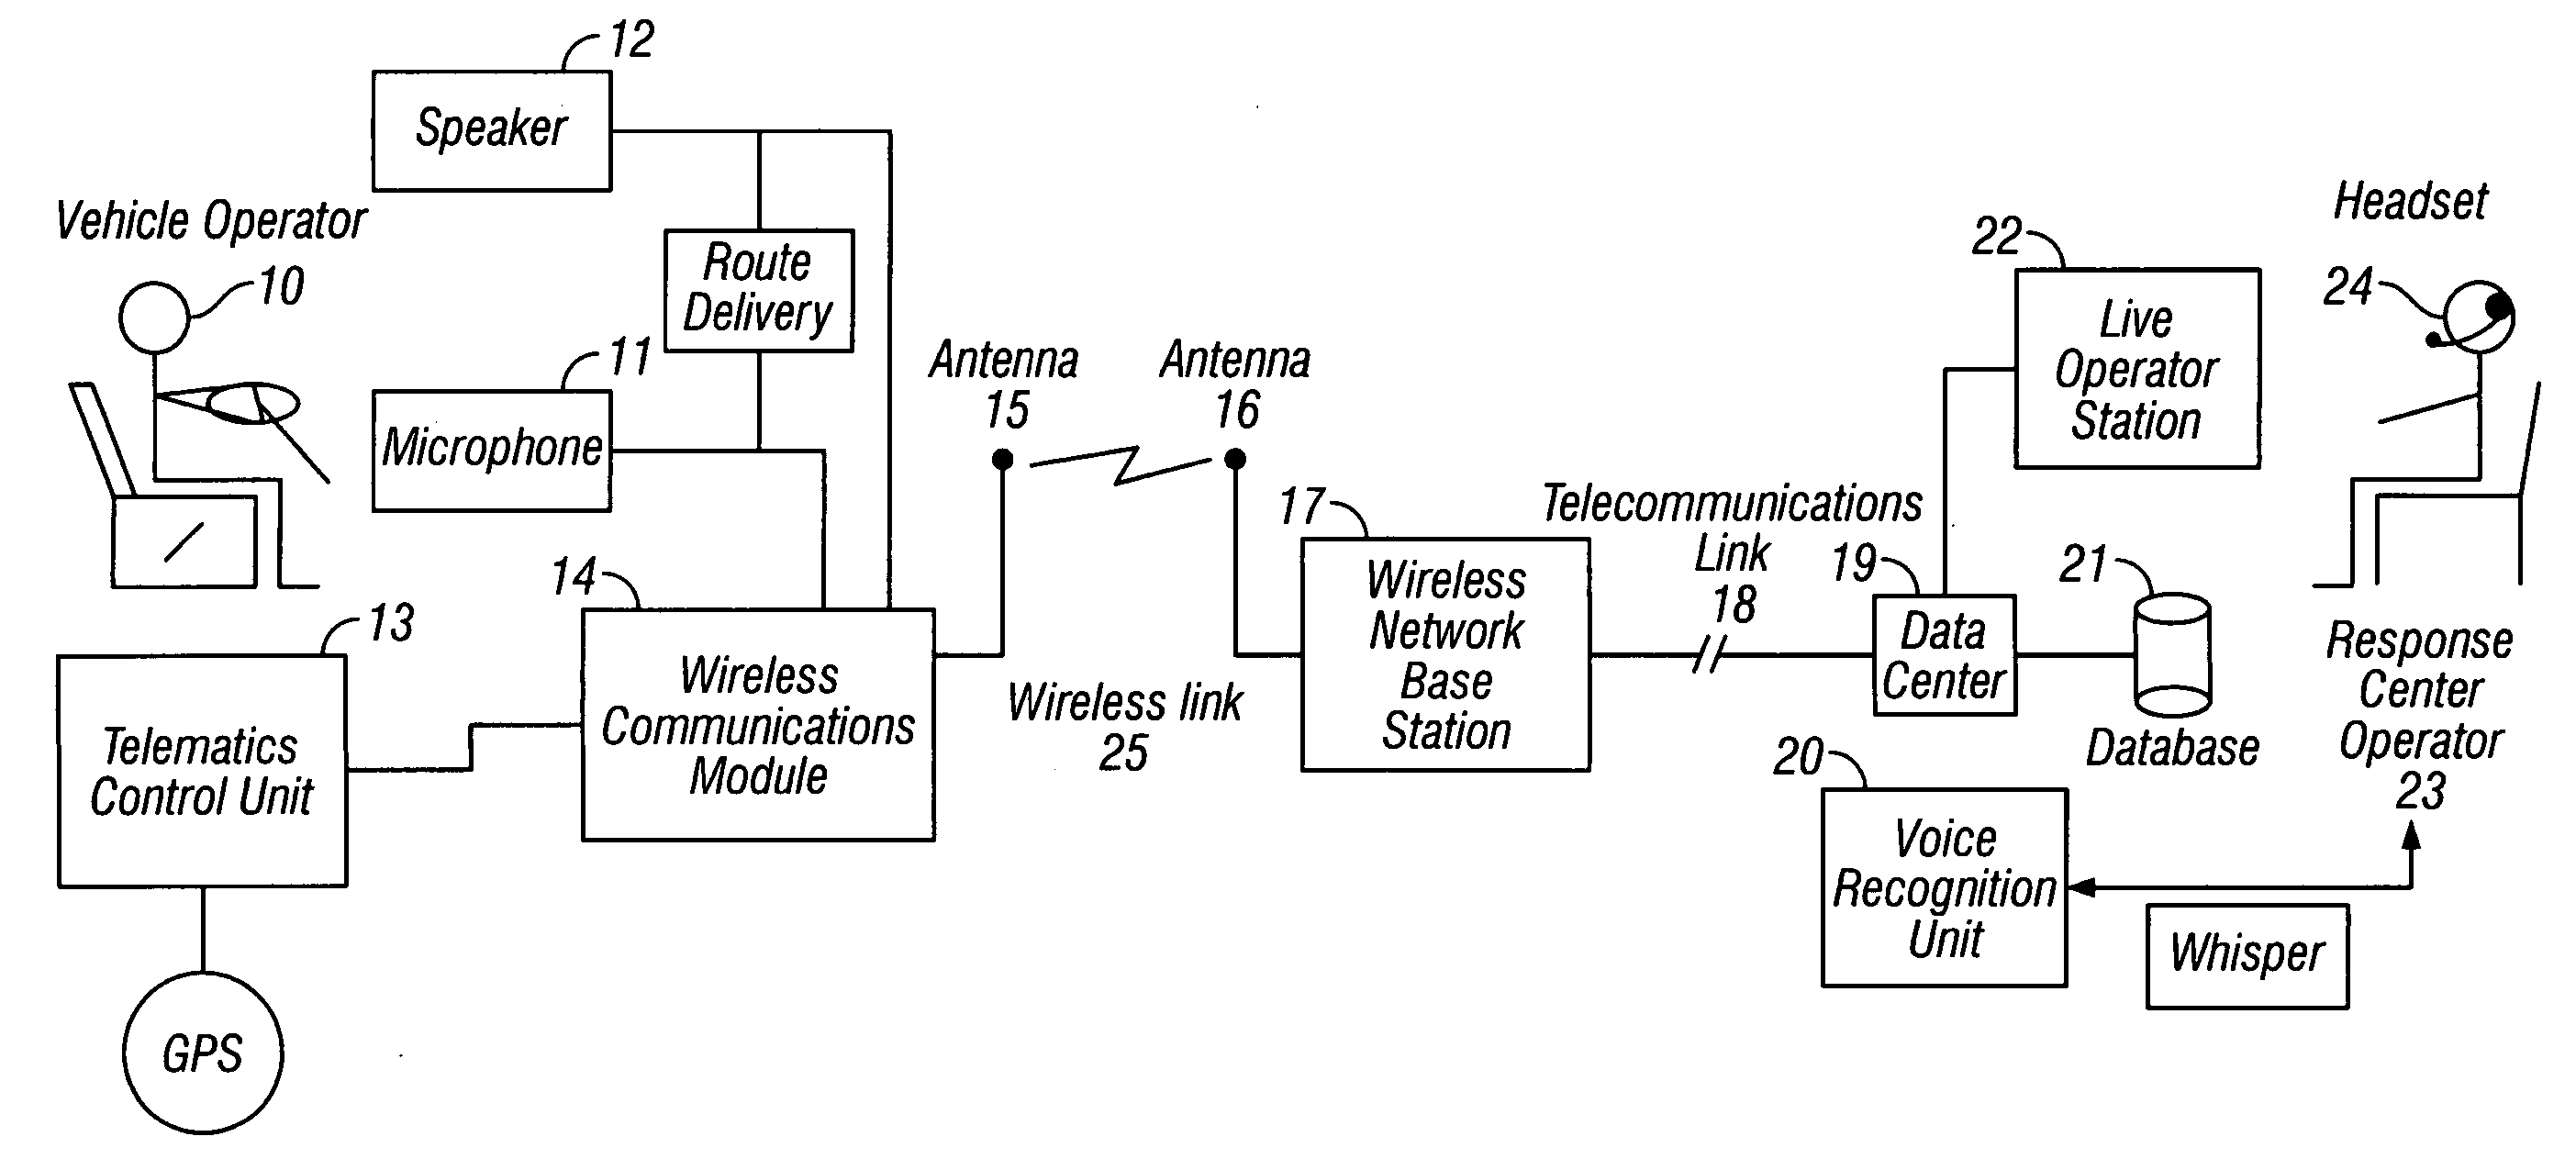 Systems and methods for off-board voice-automated vehicle navigation